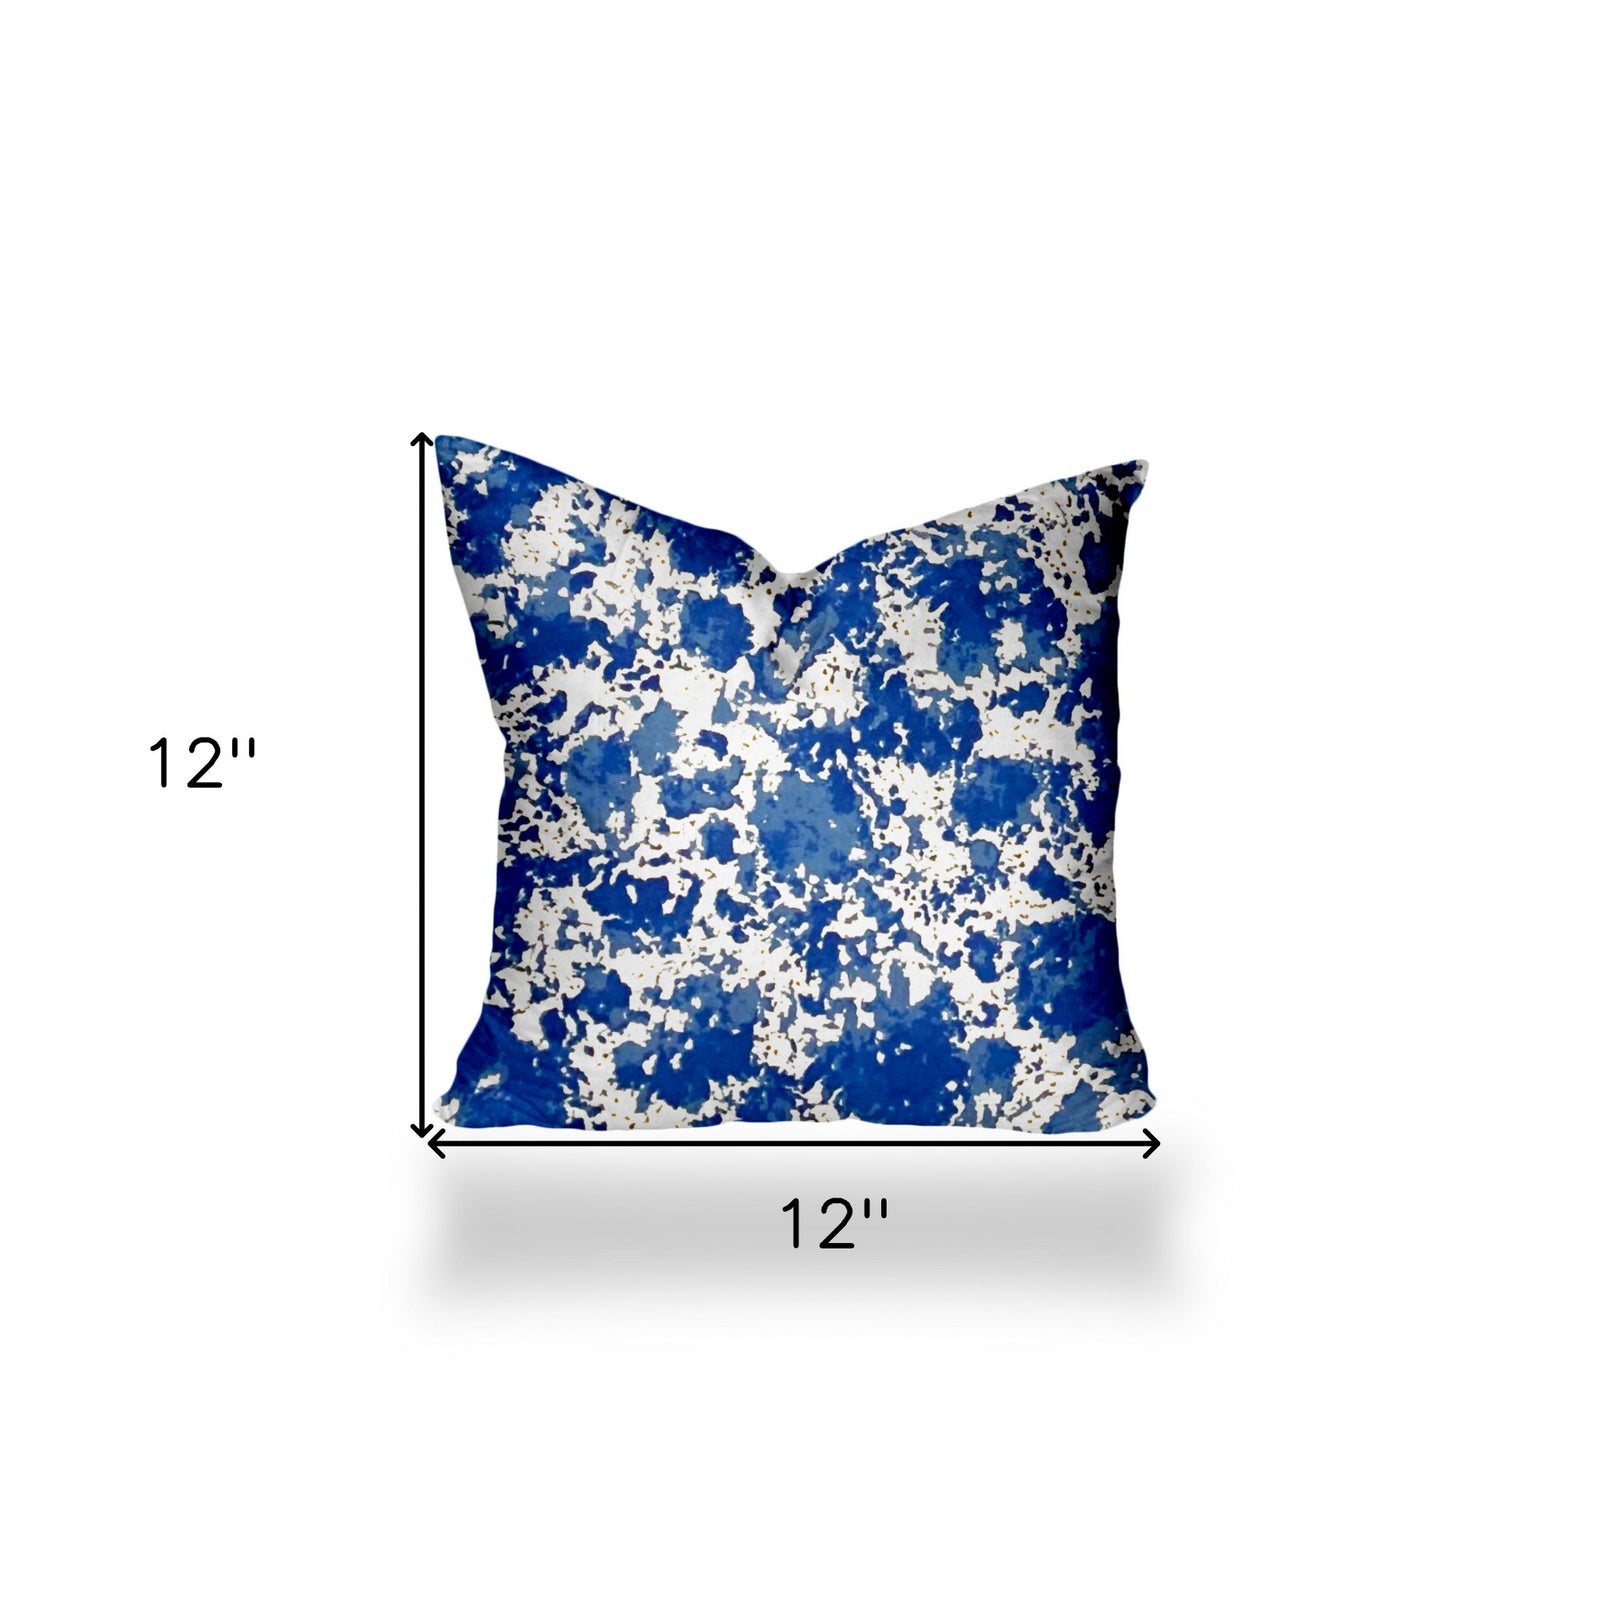 12" X 12" Blue And White Enveloped Throw Indoor Outdoor Pillow Cover